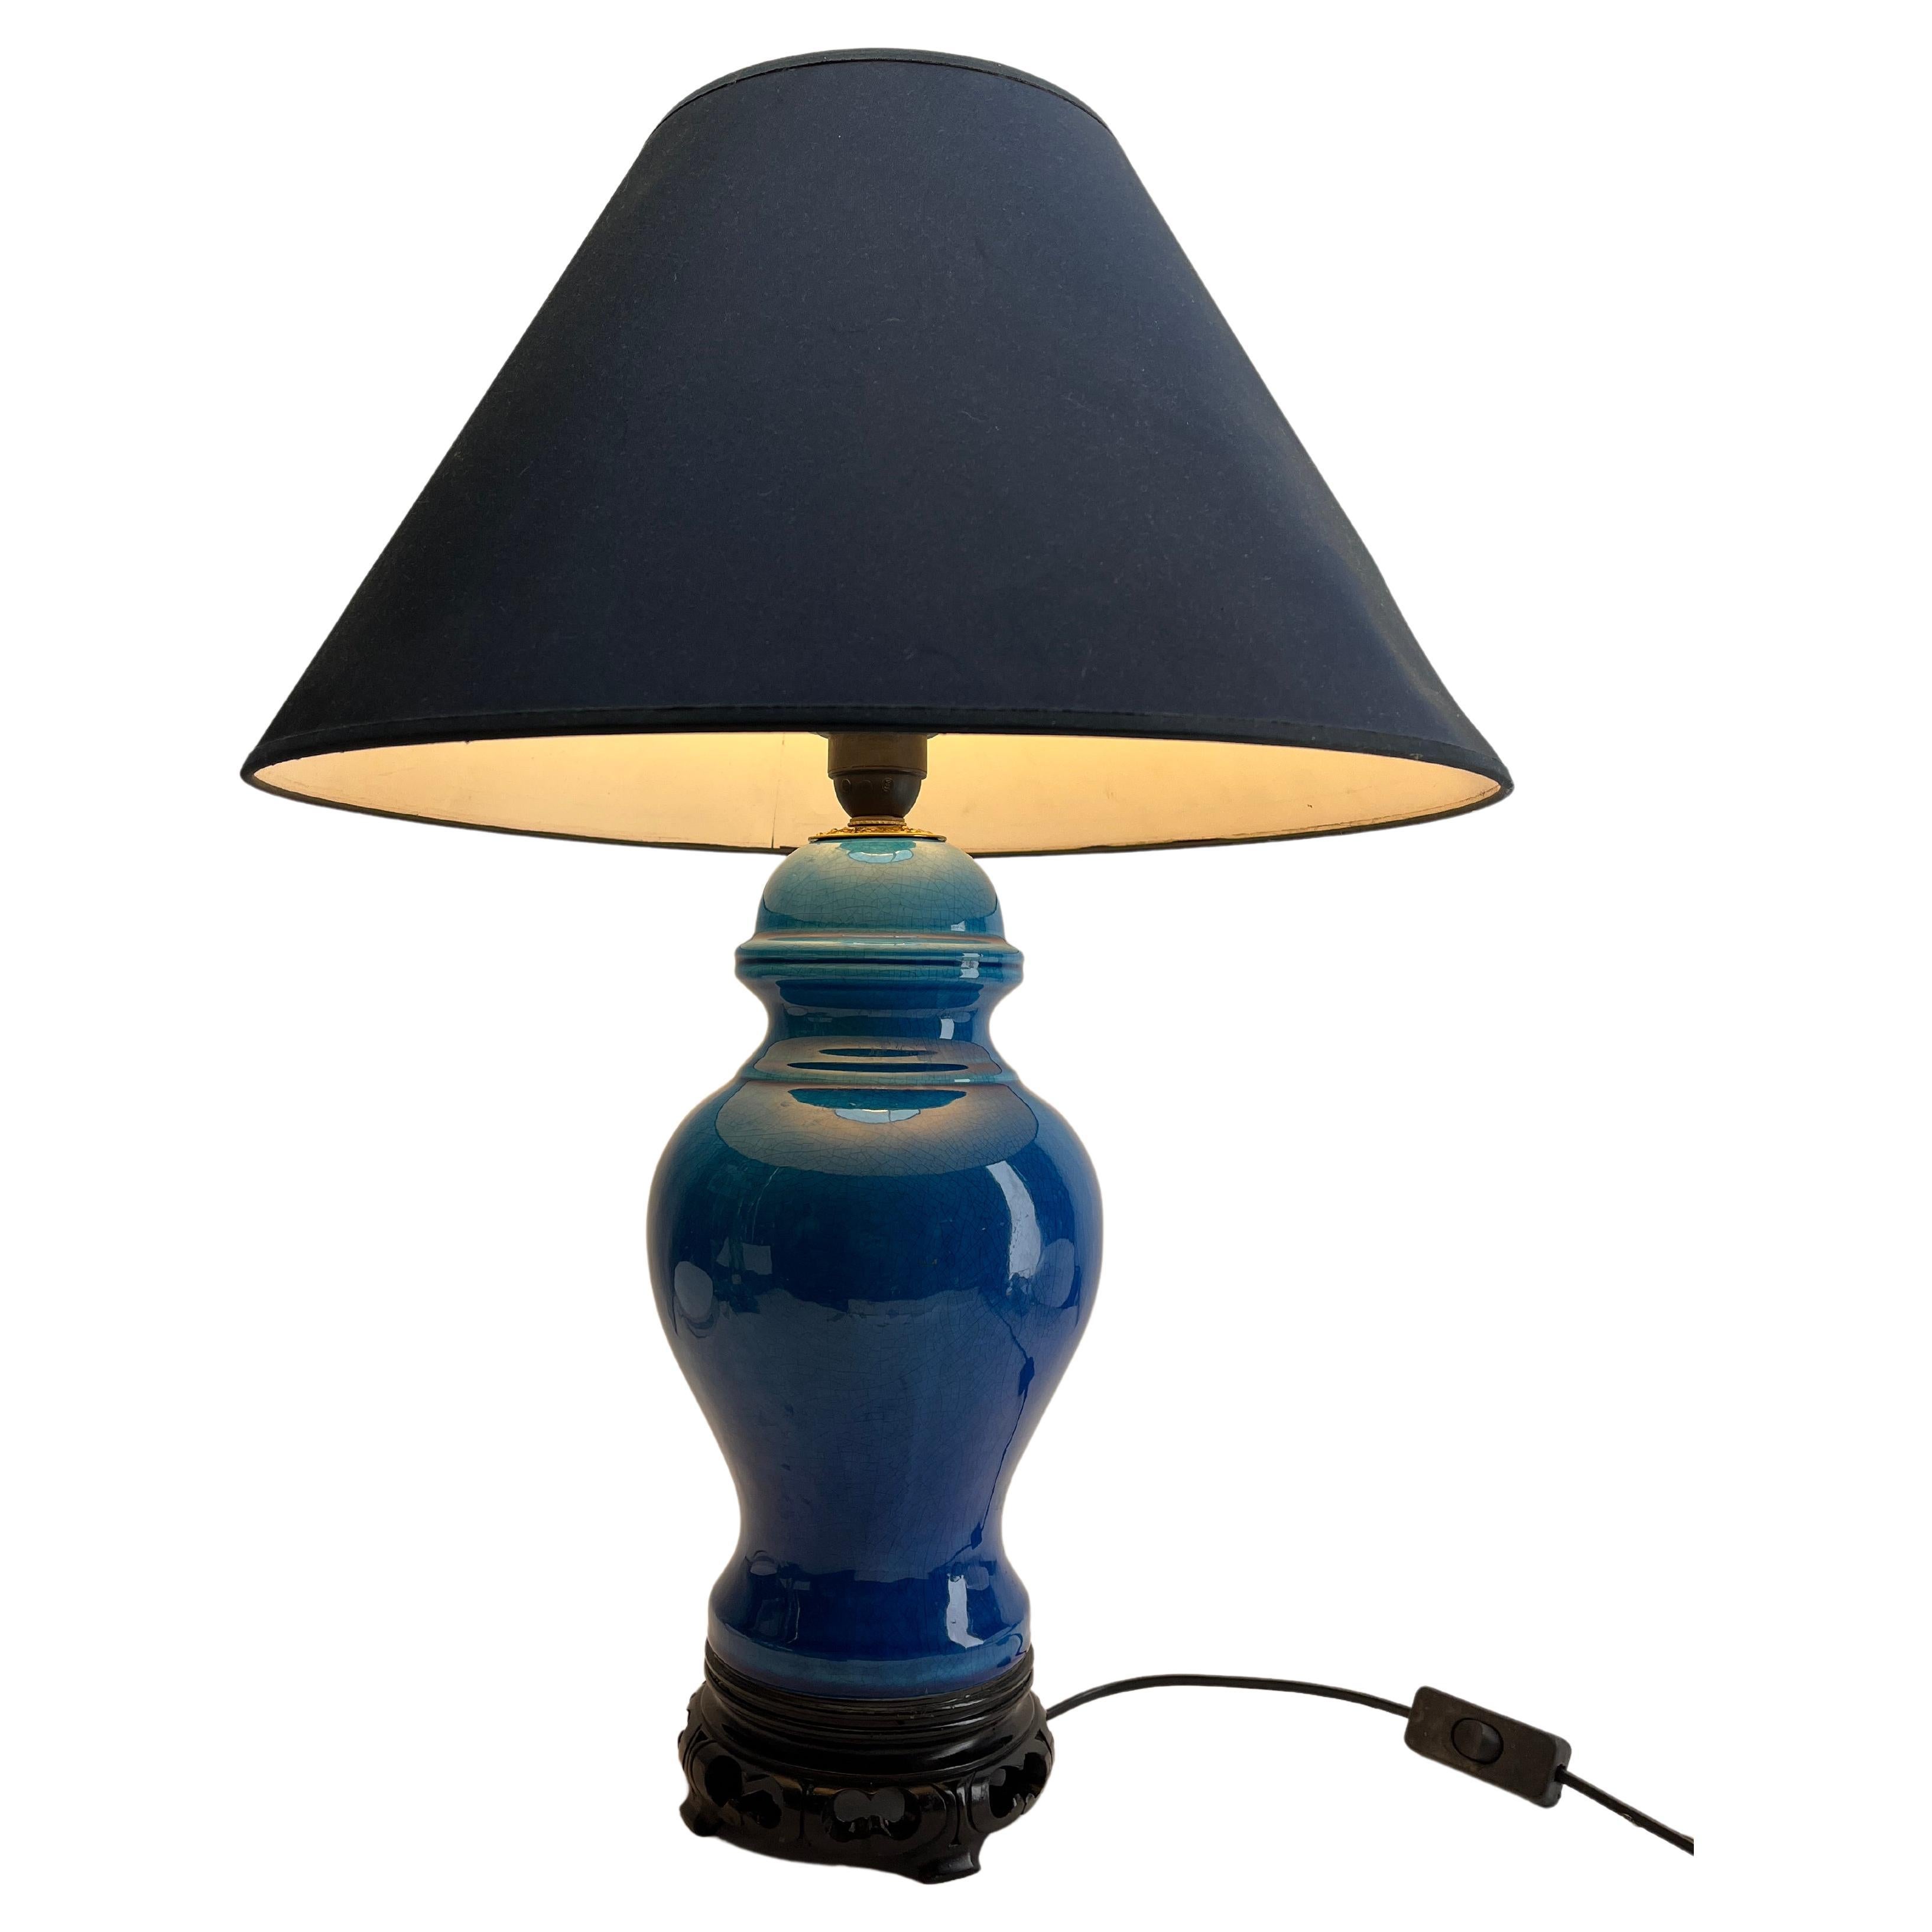 Inspired by a centuries-old technique of Chinese ceramics, this elegant table lamp is a bright and dramatic shade of turquoise with a fine crackle glaze. 
The dimensions are measured without a lampshade.

Renewed and rewired with lamp New fitting